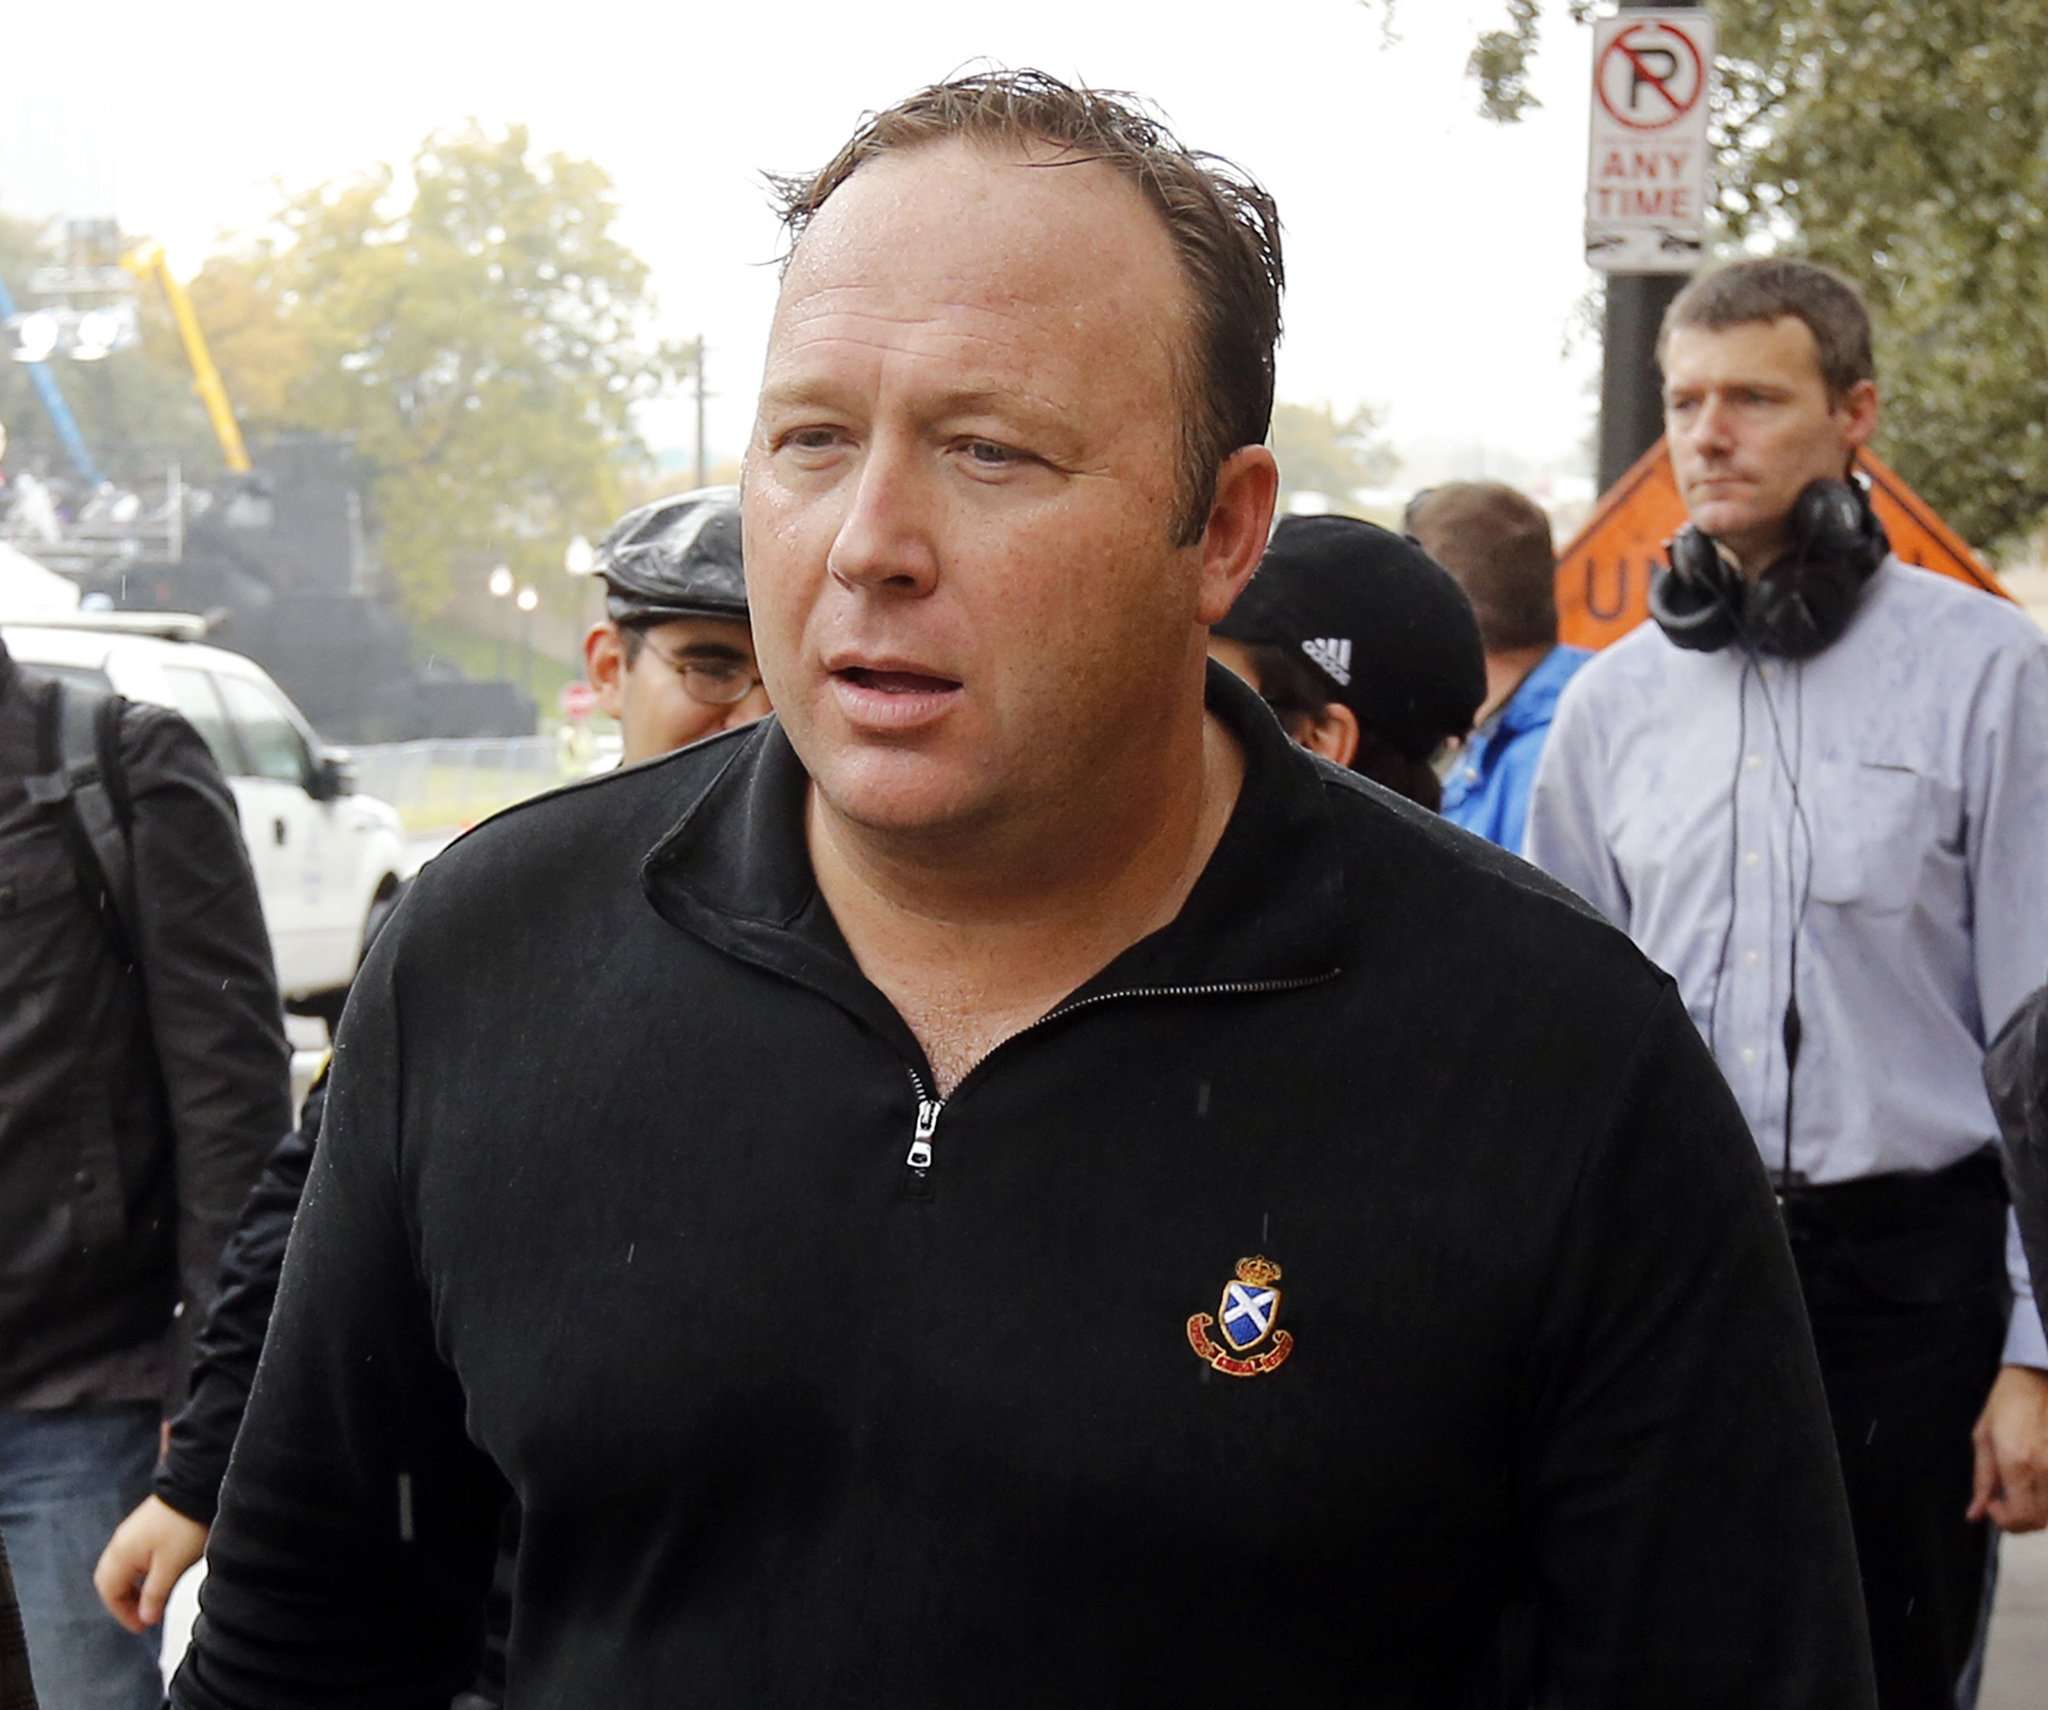 image for InfoWars' Alex Jones is a 'performance artist playing a character', according to his lawyer